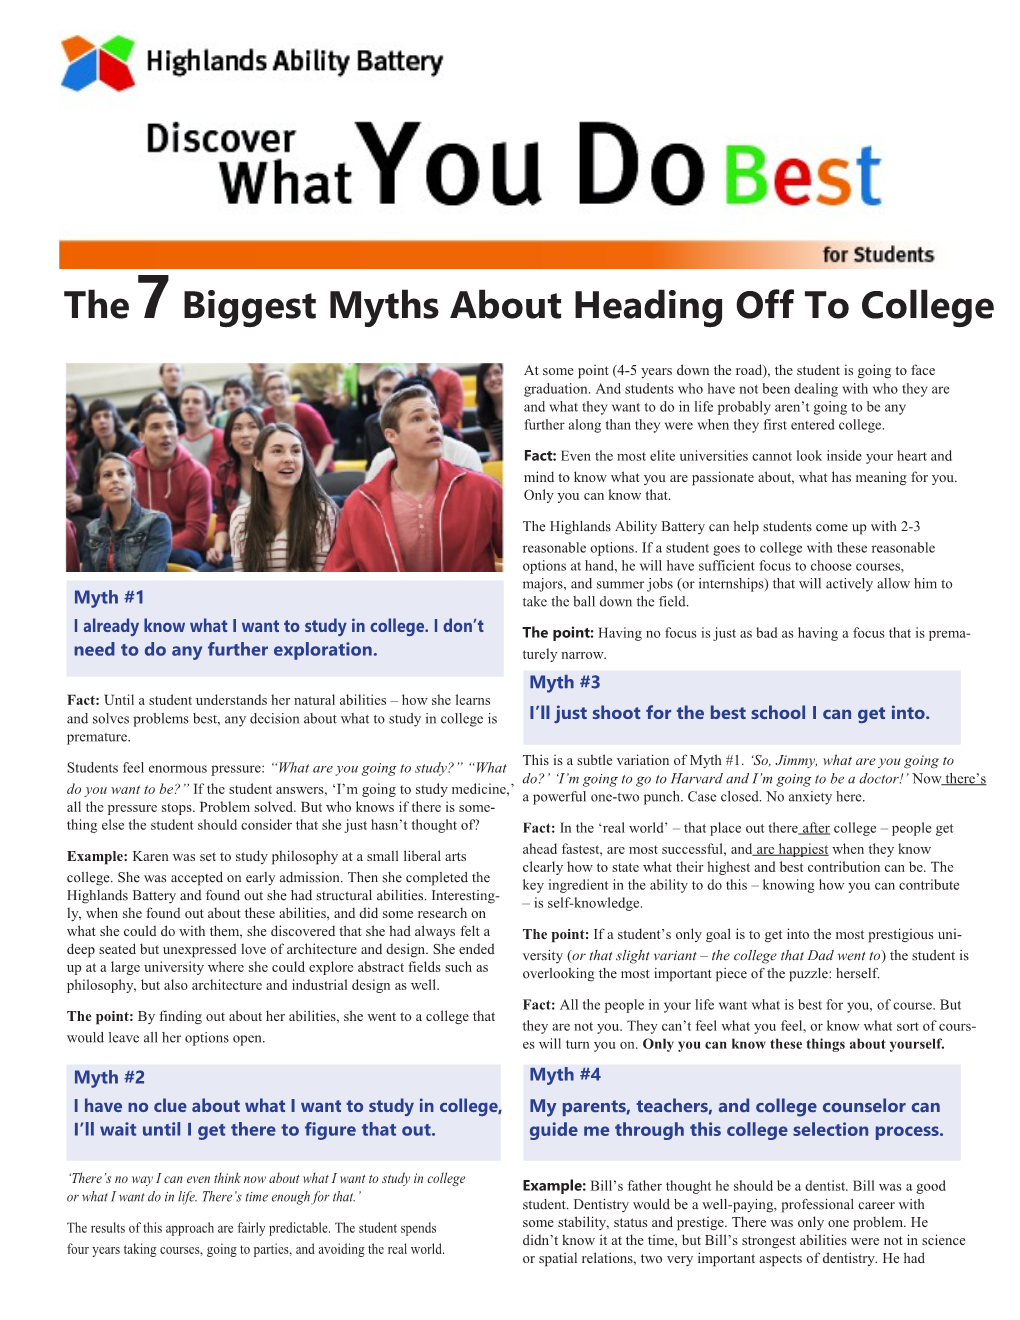 The7 Biggest Myths About Heading Off to College